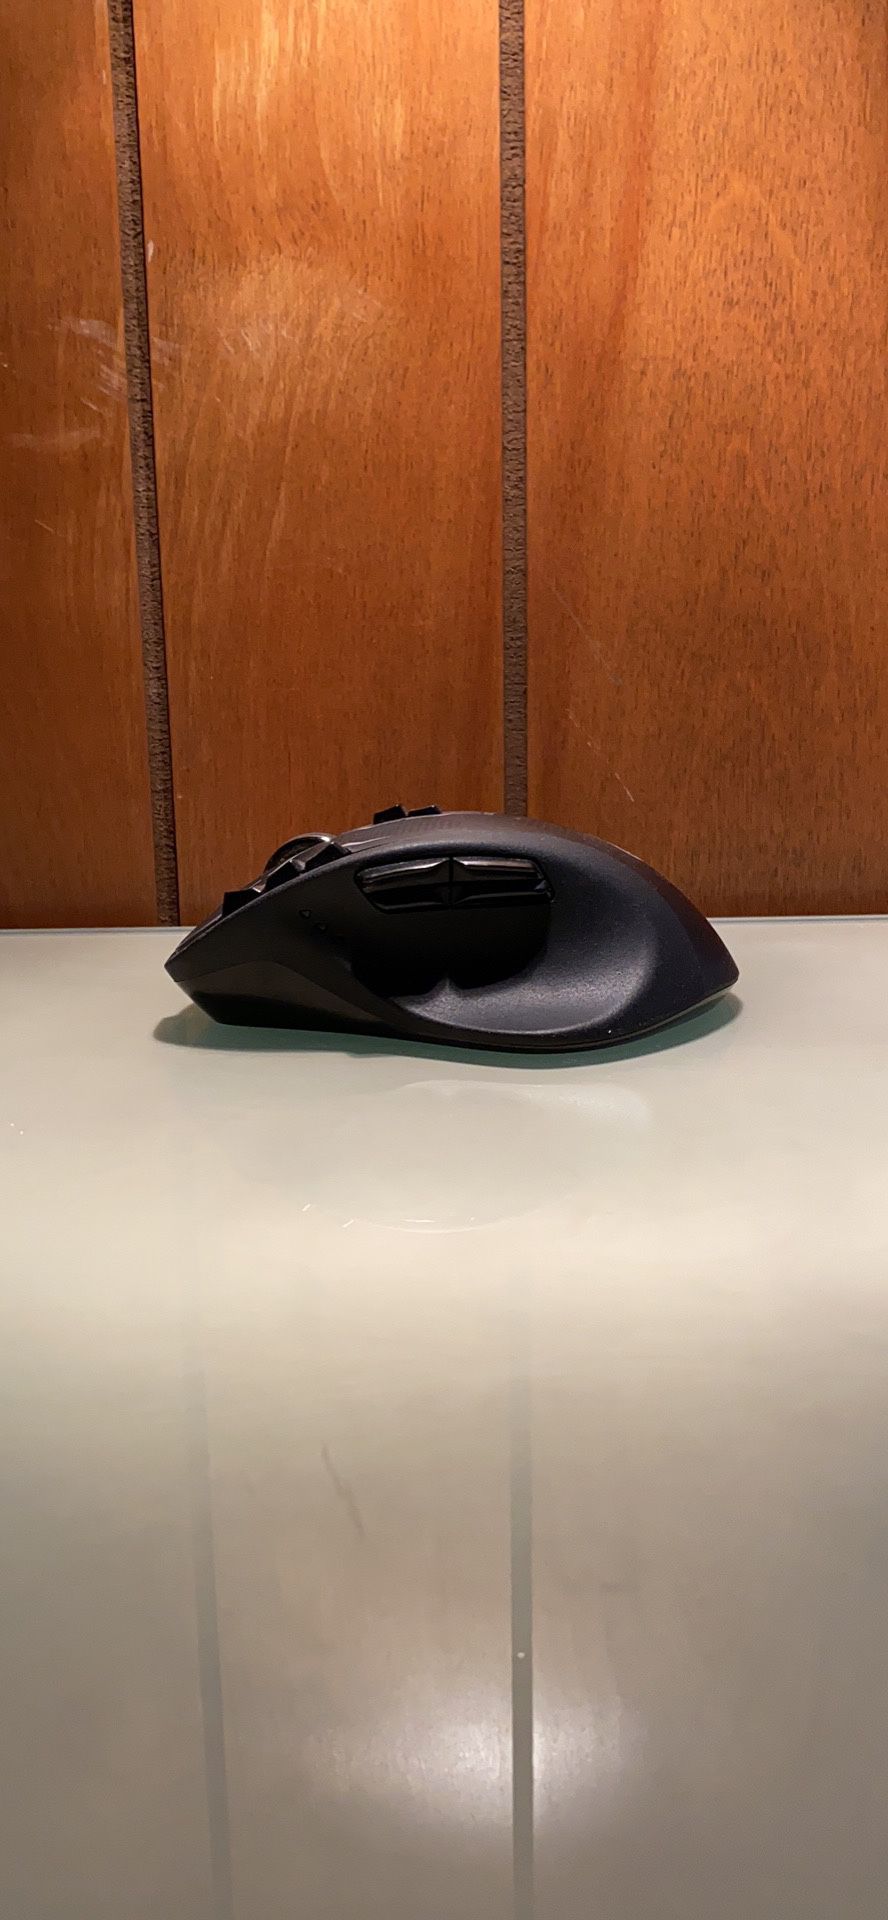 Logitech G700s **Used** Gaming Mouse MSRP $260